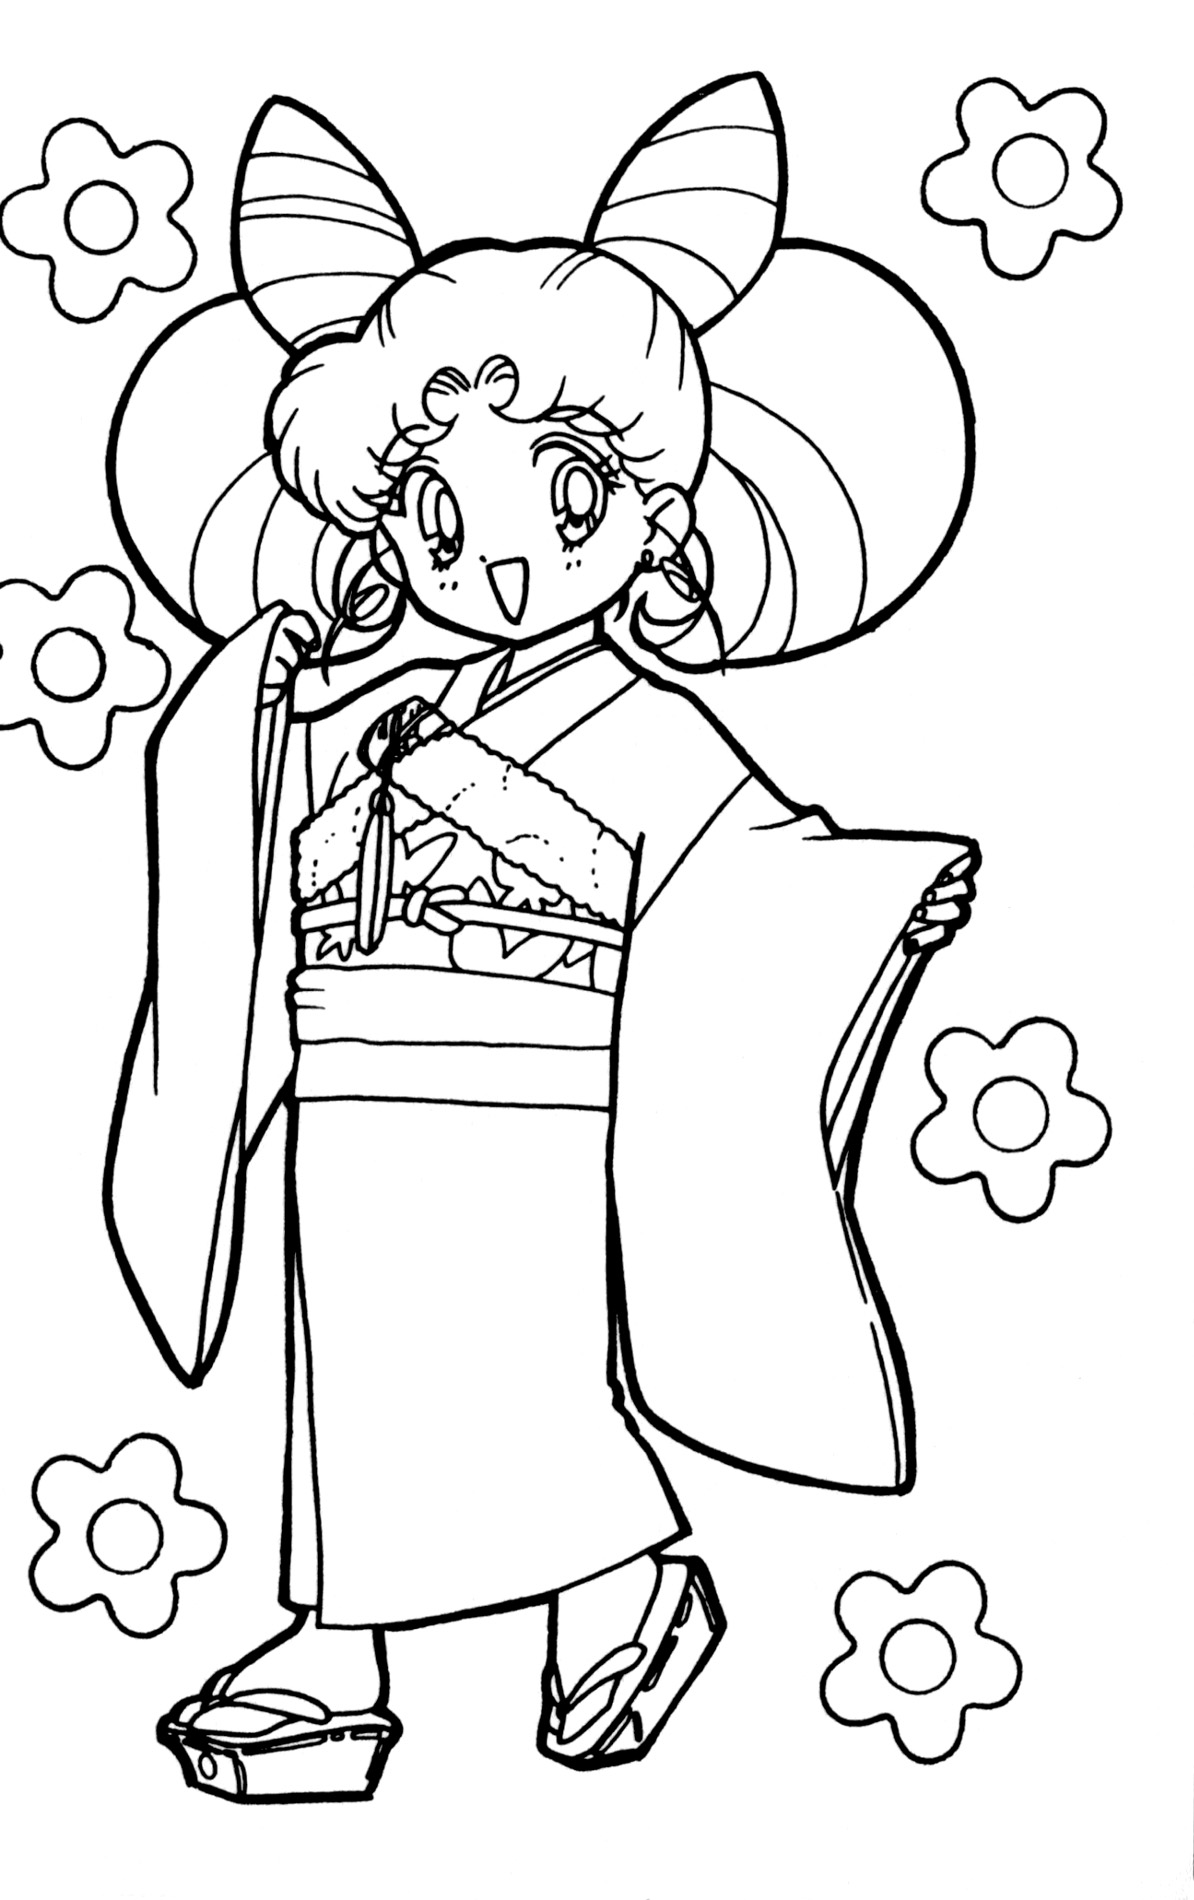 Here's the Best Website for Sailor Moon Coloring Book Pages